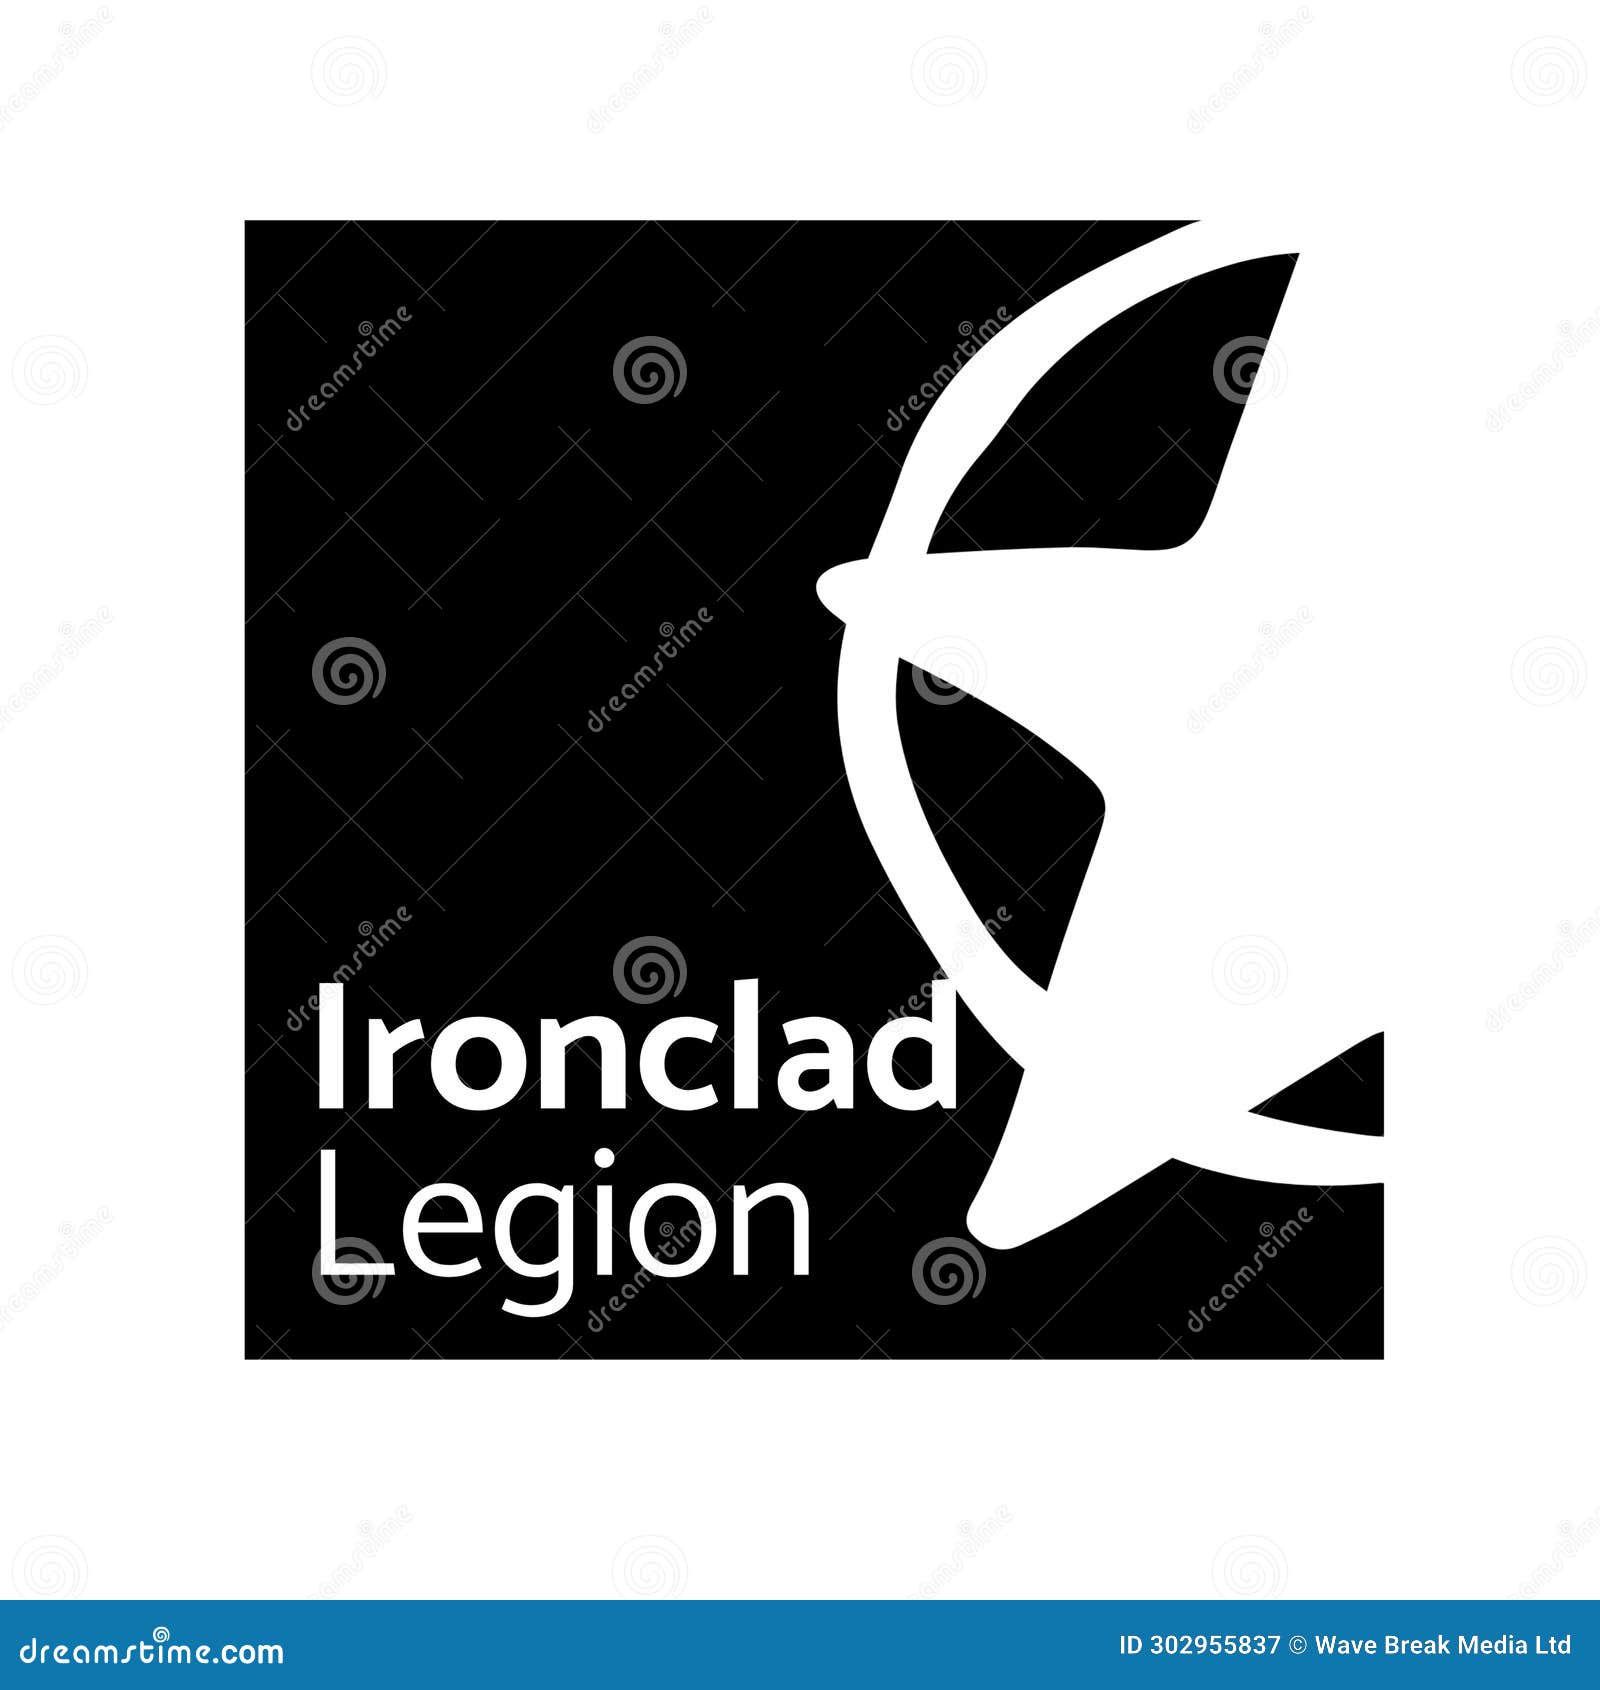 ironclad legion text in white with half star in ring in black rectangle logo on white background